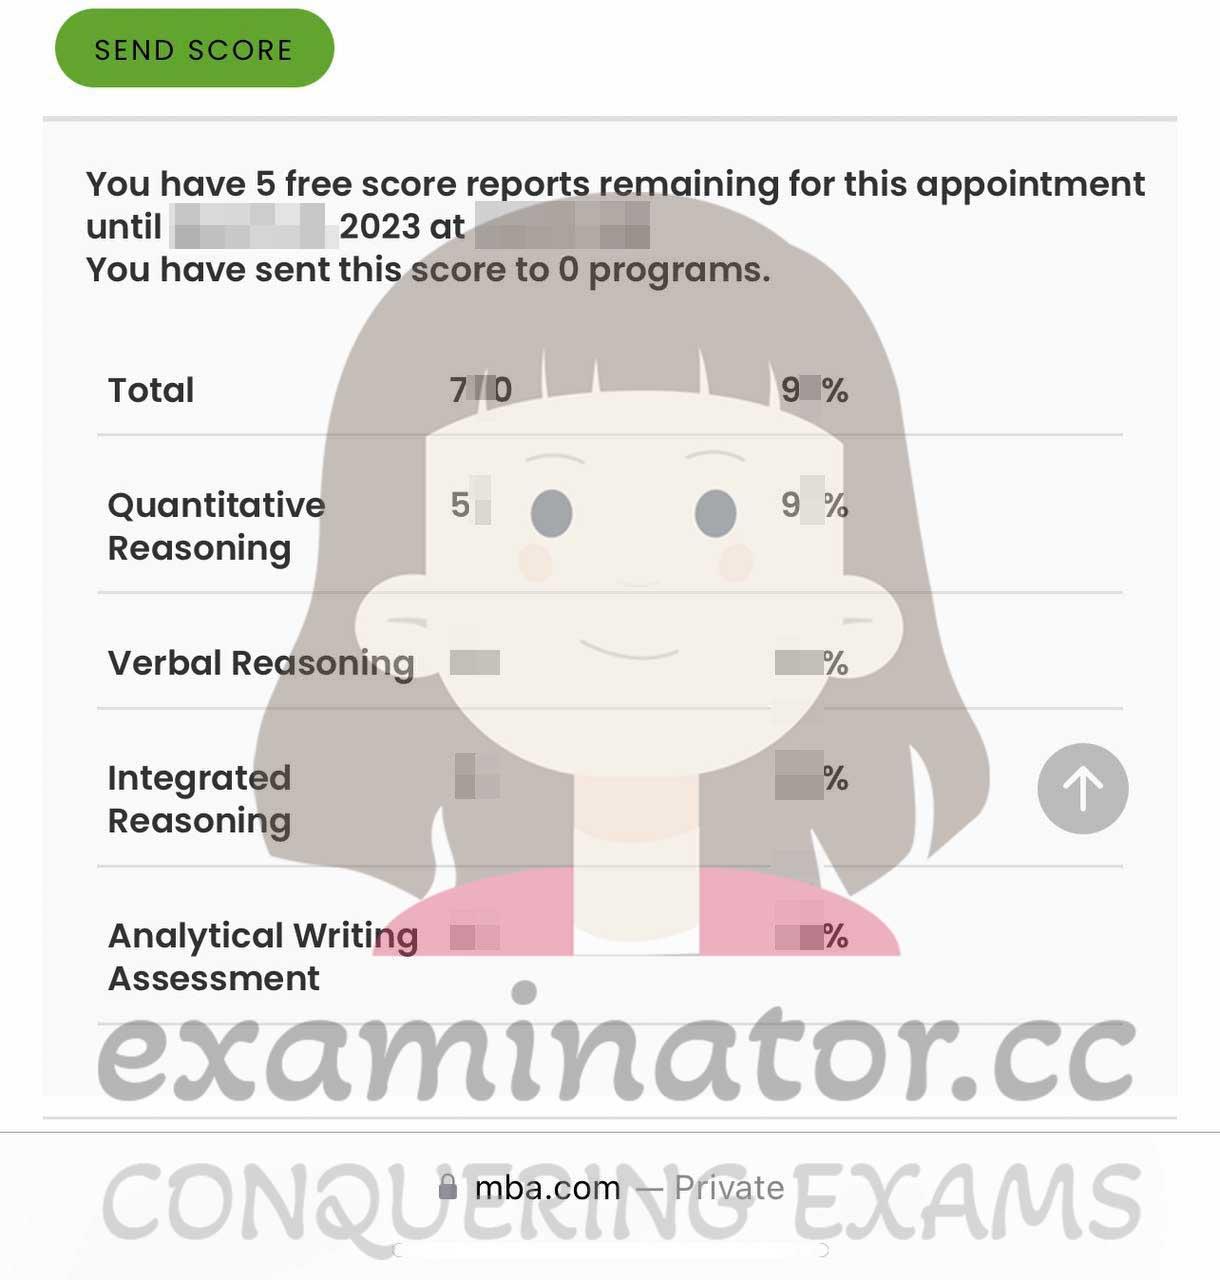 🇺🇸 "Legit!" US Client Received 720+ Official Score on GMAT, Credits Professional GMAT Cheating Team for Success and Inquires About LSAT Cheating Services🚀